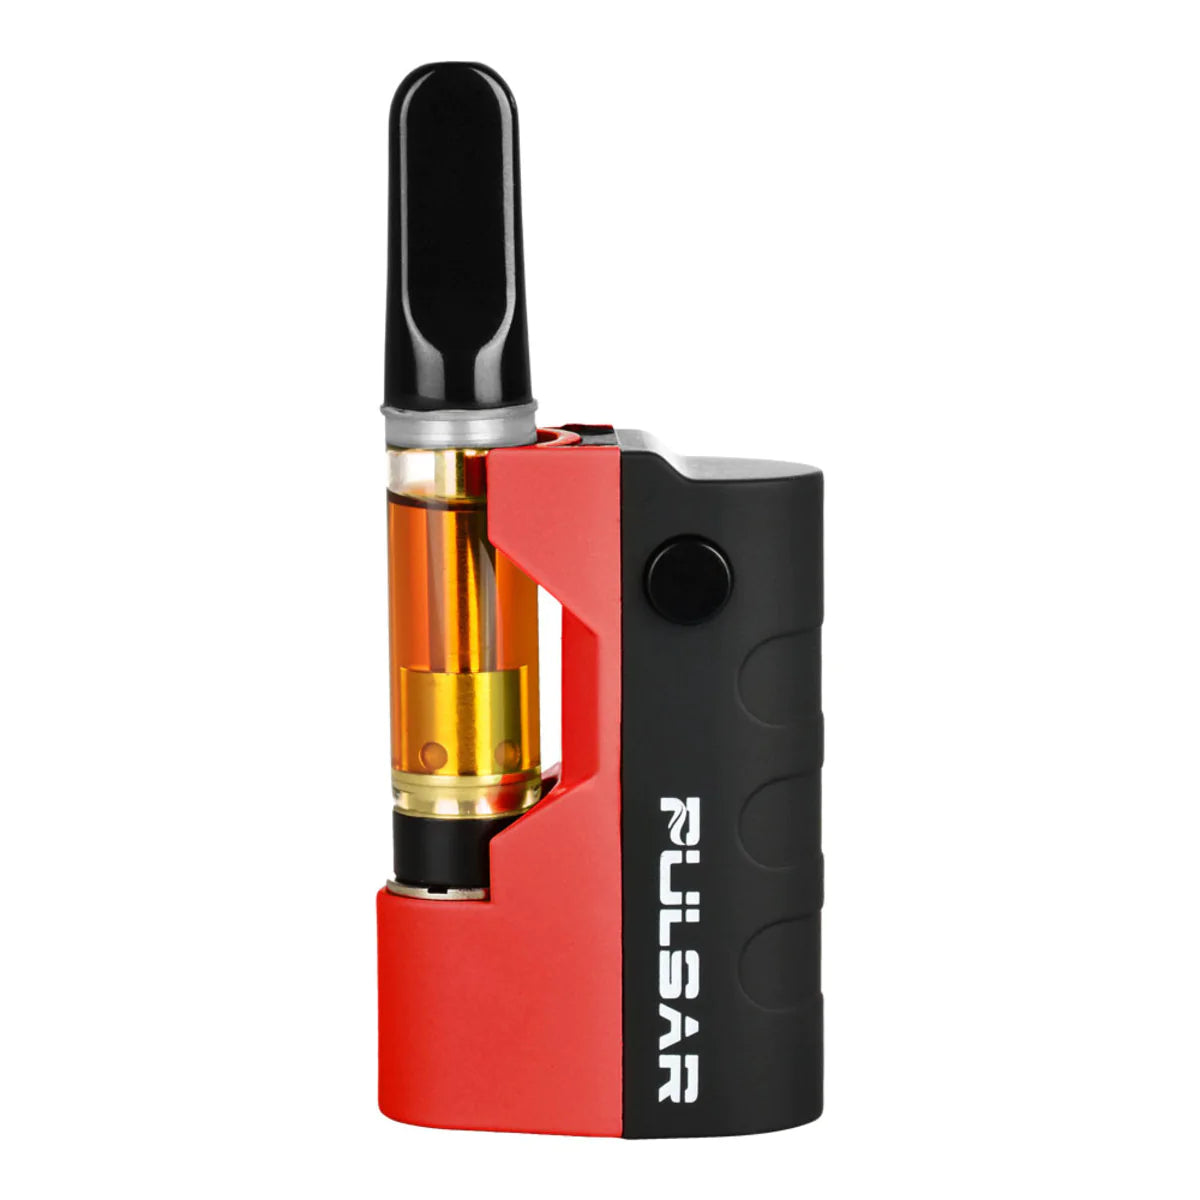 Pulsar GIGI Vaporizer Battery in red, compact 2" size, front view on a white background